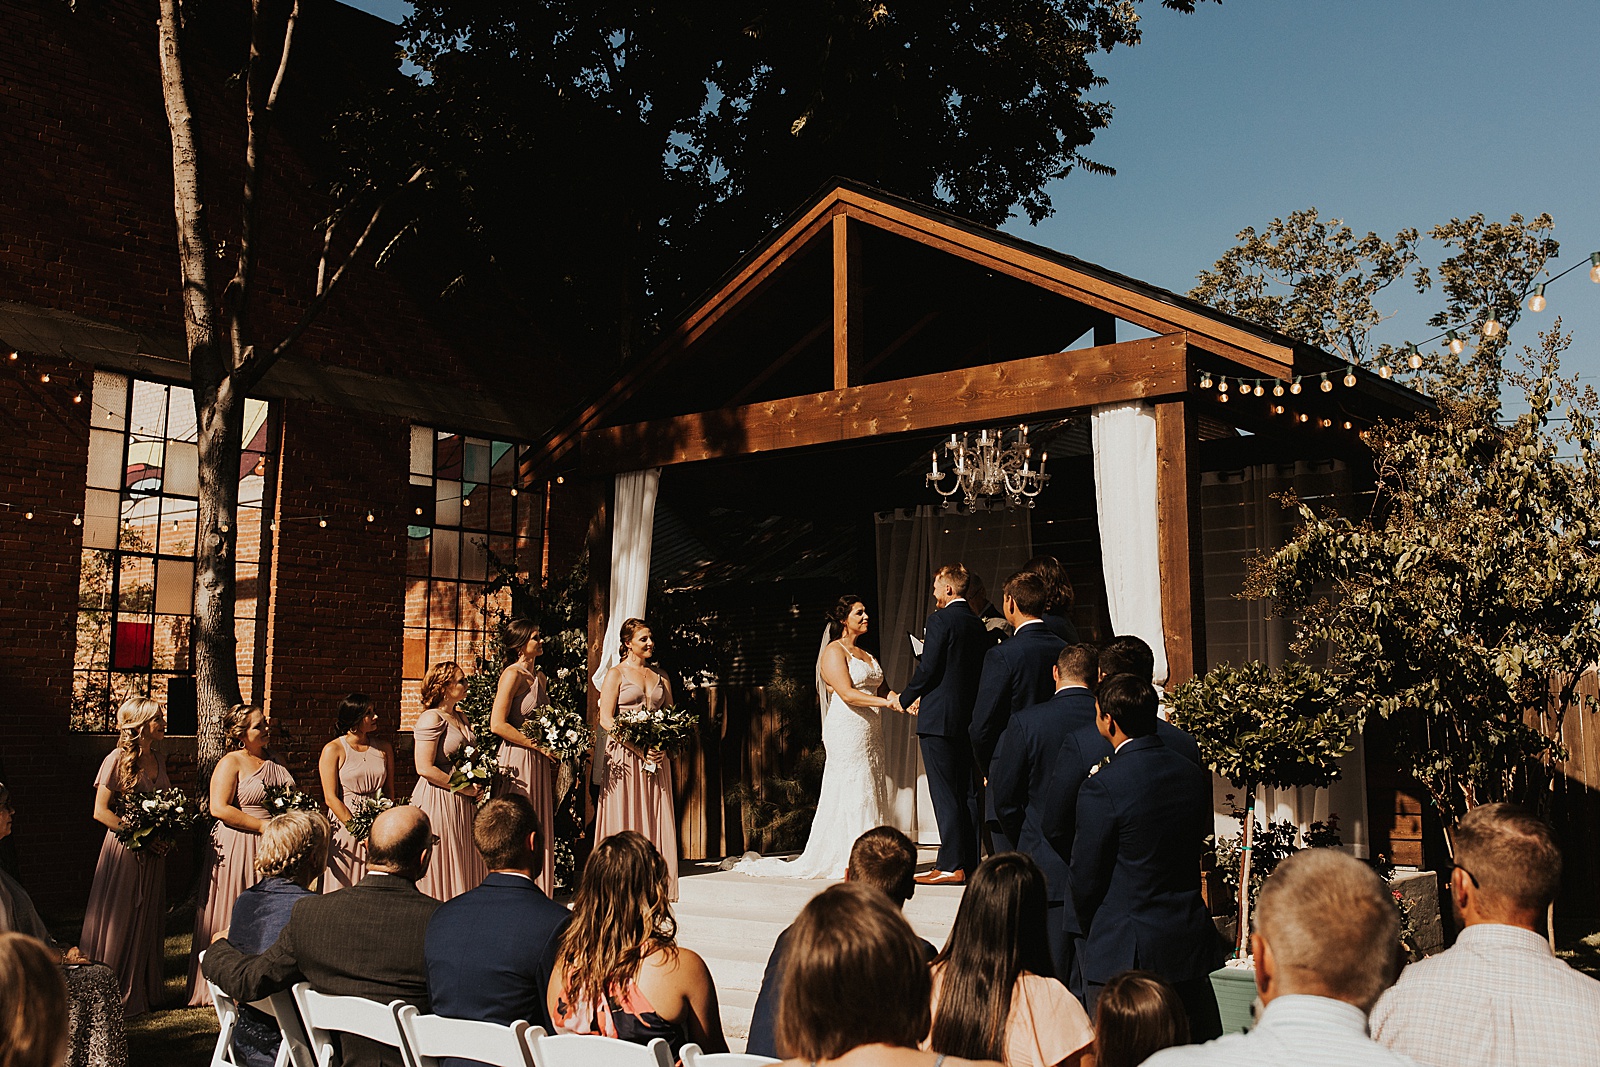 A gorgeous wedding photo at the Soda District Courtyard in Abilene.